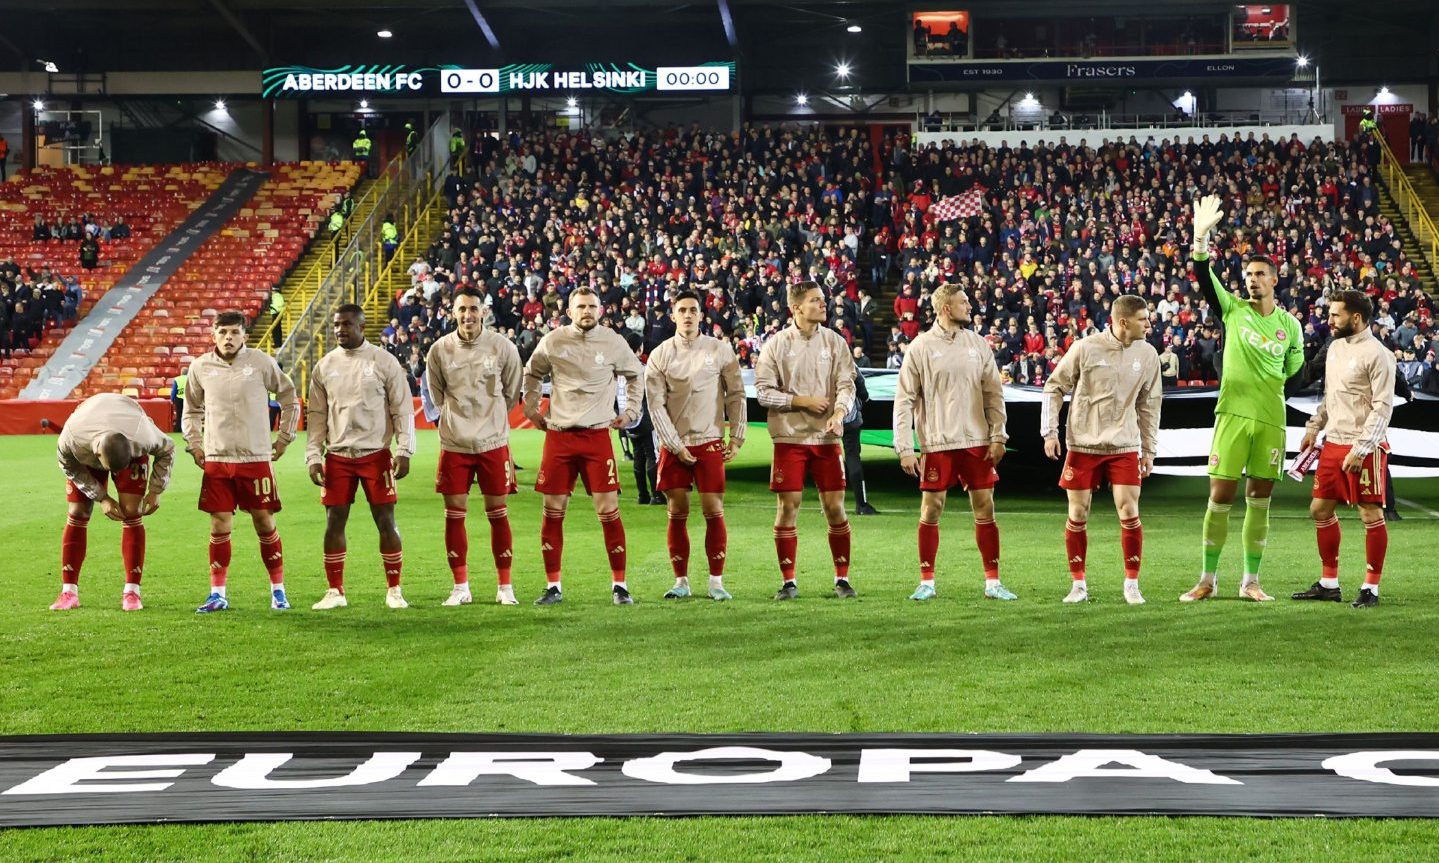 Aberdeen players lined up on the pitch before the match